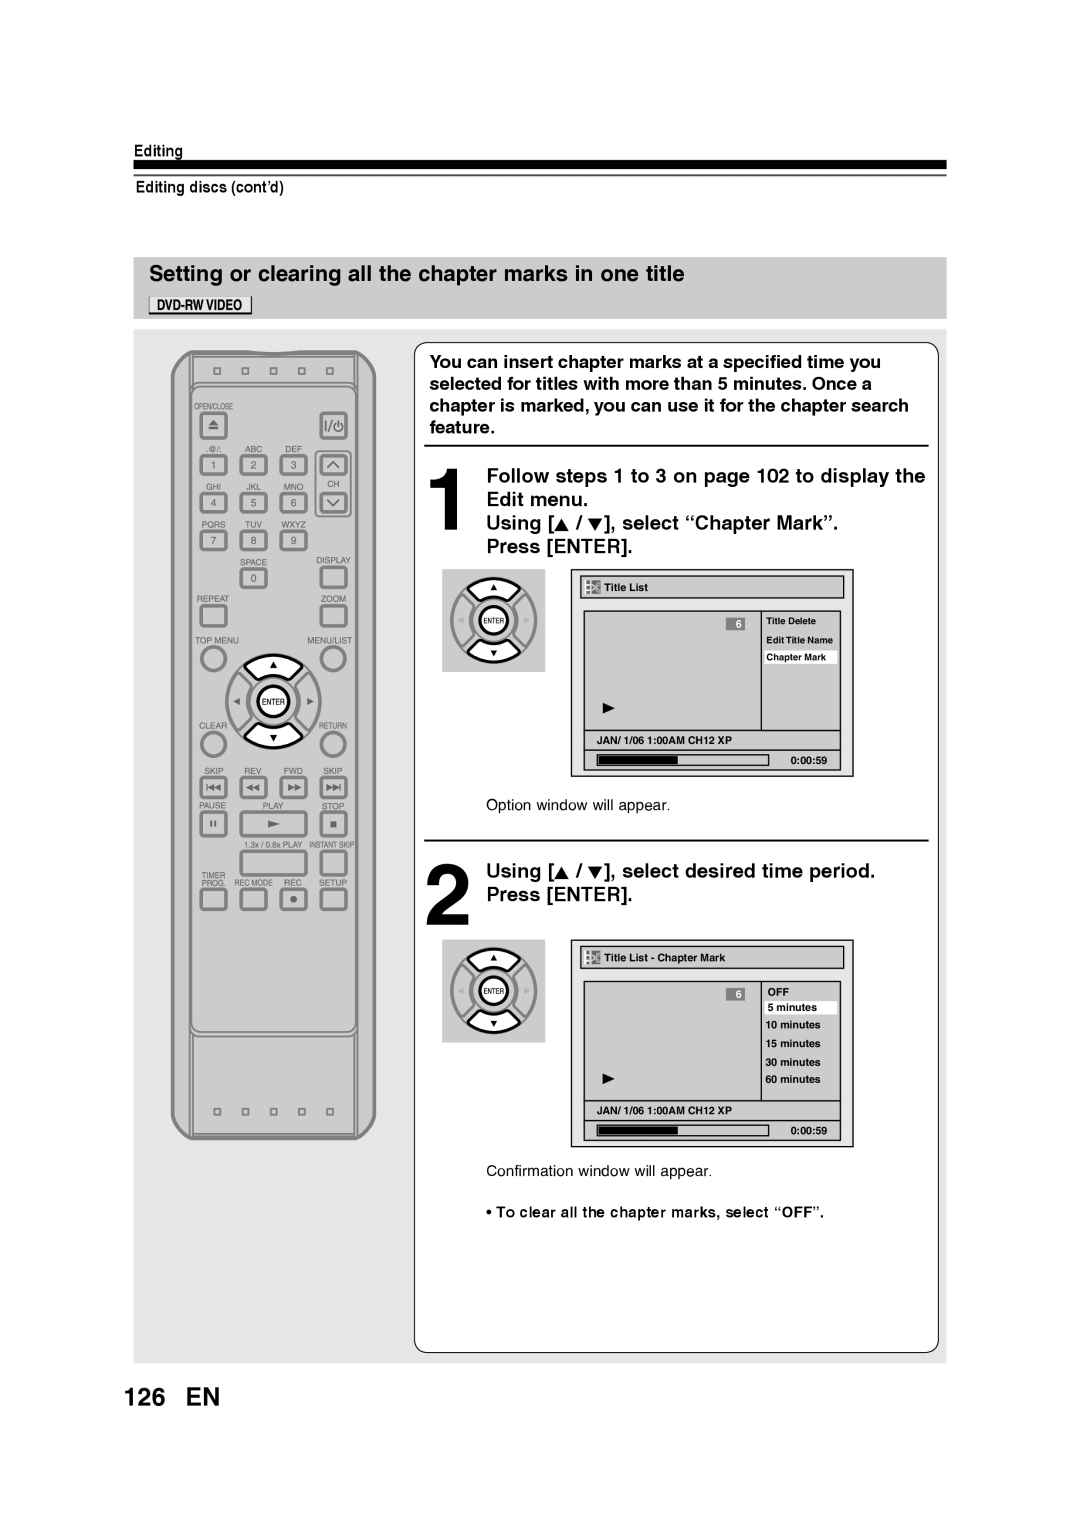 Toshiba D-RW2SU/D-RW2SC manual 126 EN, Setting or clearing all the chapter marks in one title, Editing Editing discs cont’d 